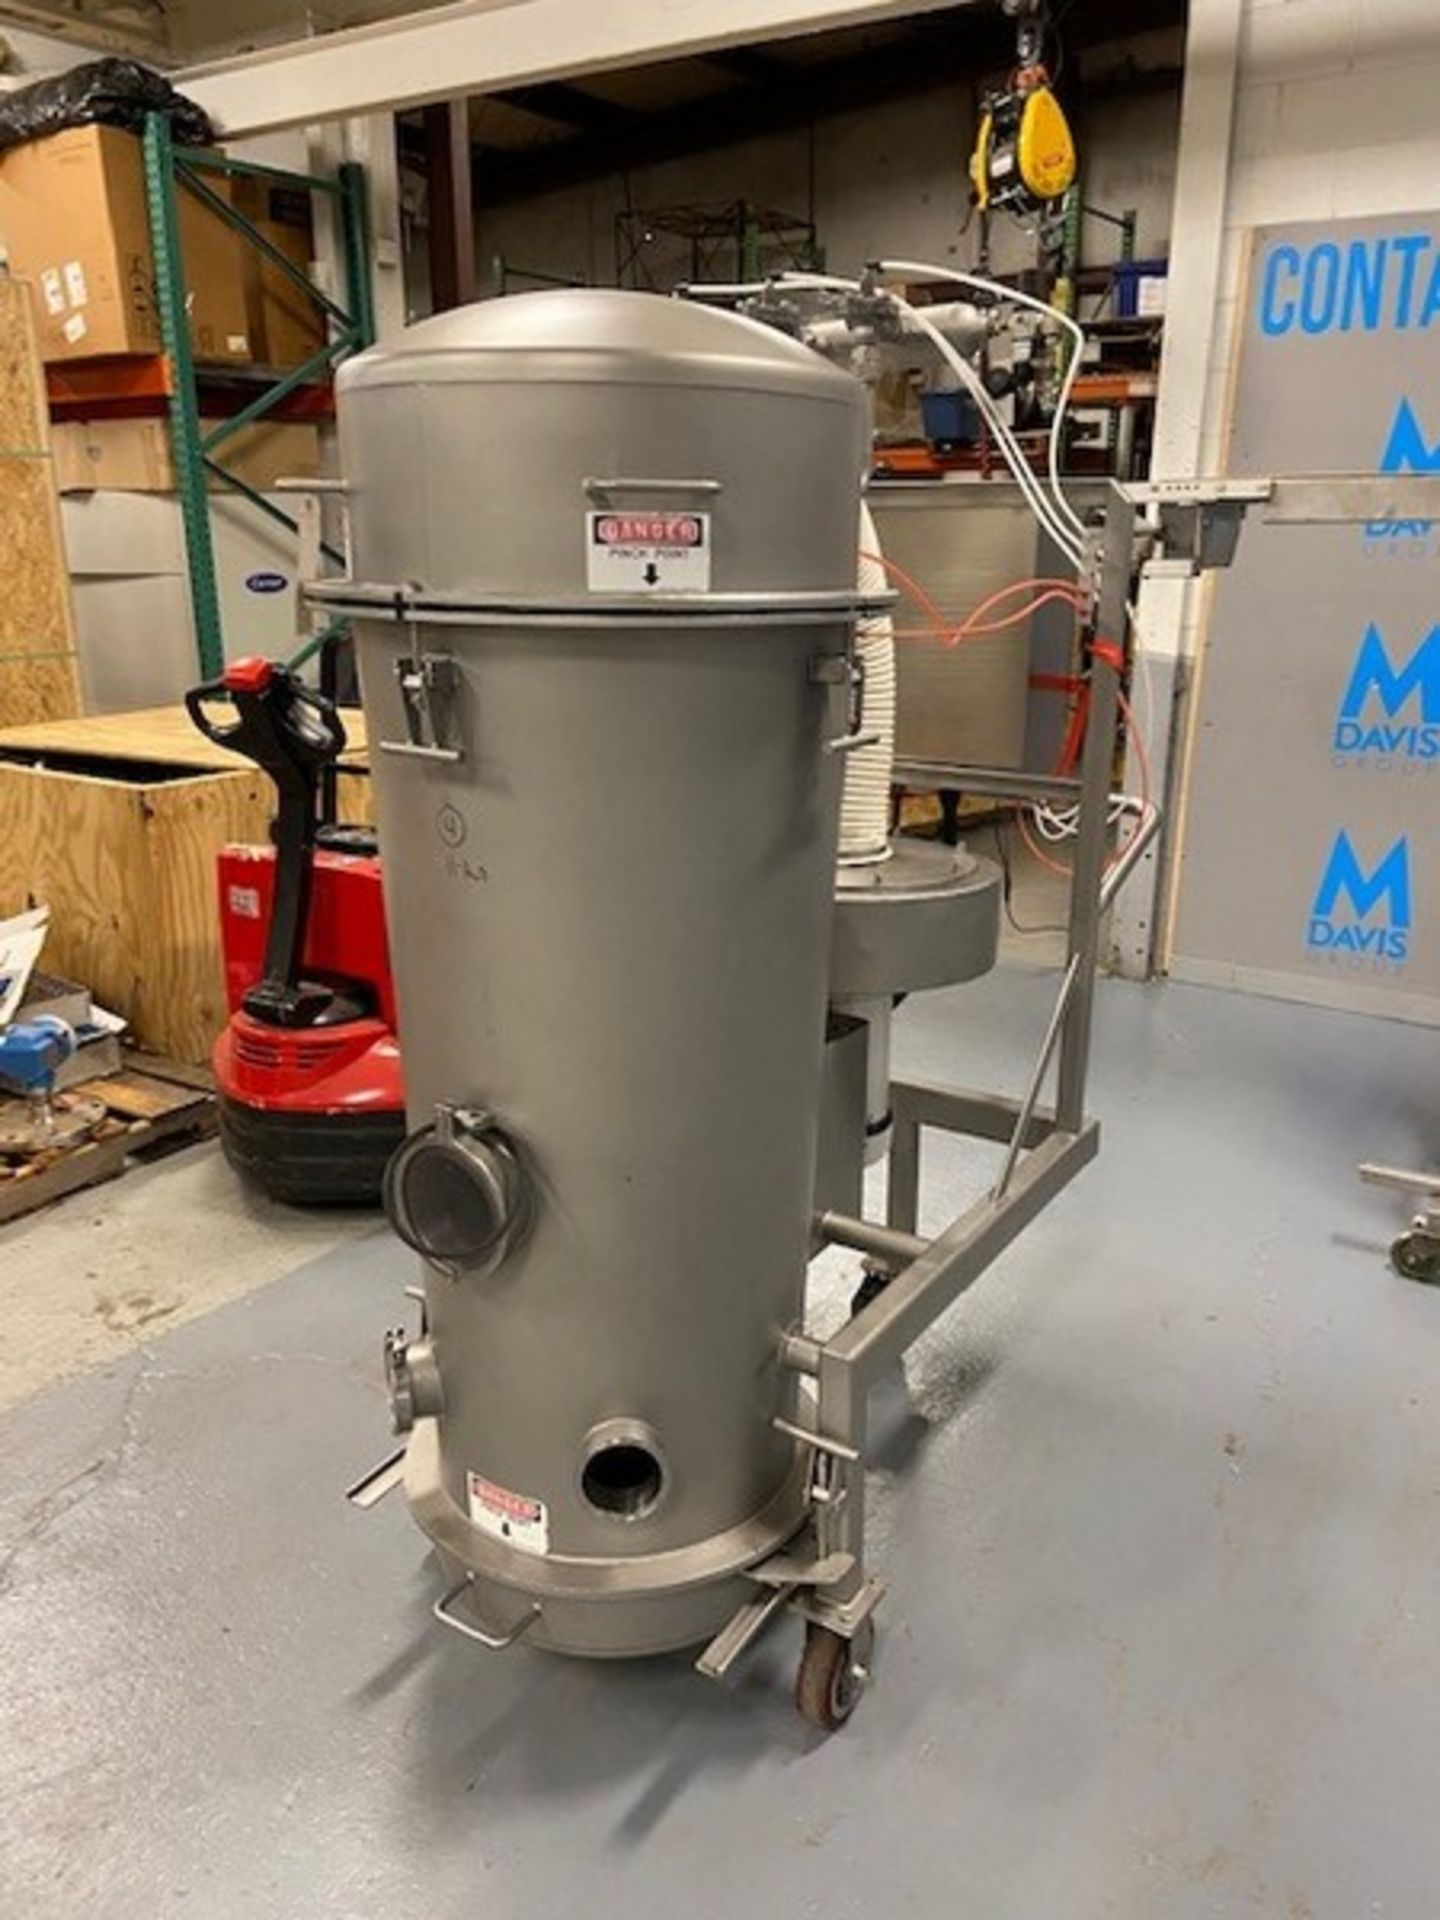 Marchant Schmidt Inc. S/S Dust Collector, I.D. No.: 10386 001, with S/S Control Panel Containing - Image 8 of 9